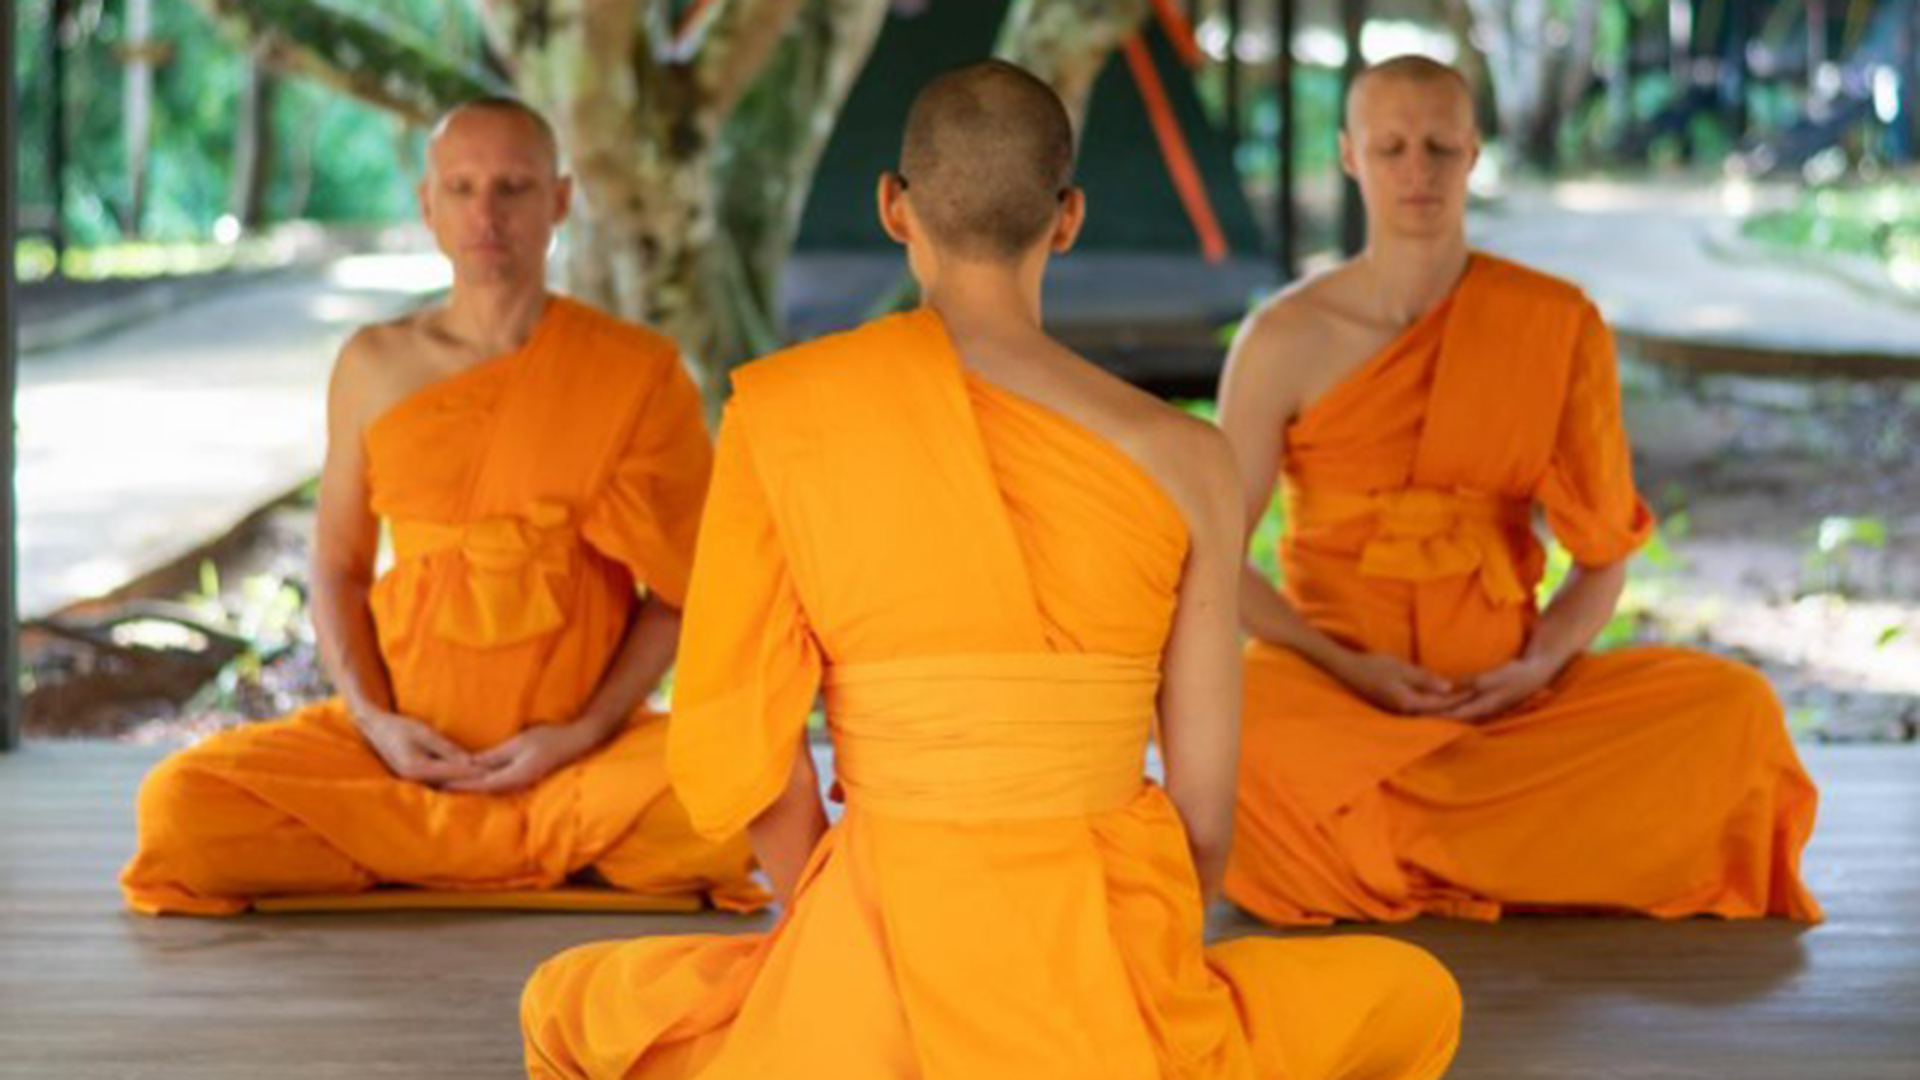 I was a football champion but quit to be a Buddhist monk – I packed everything up for a simpler life in Thailand [Video]